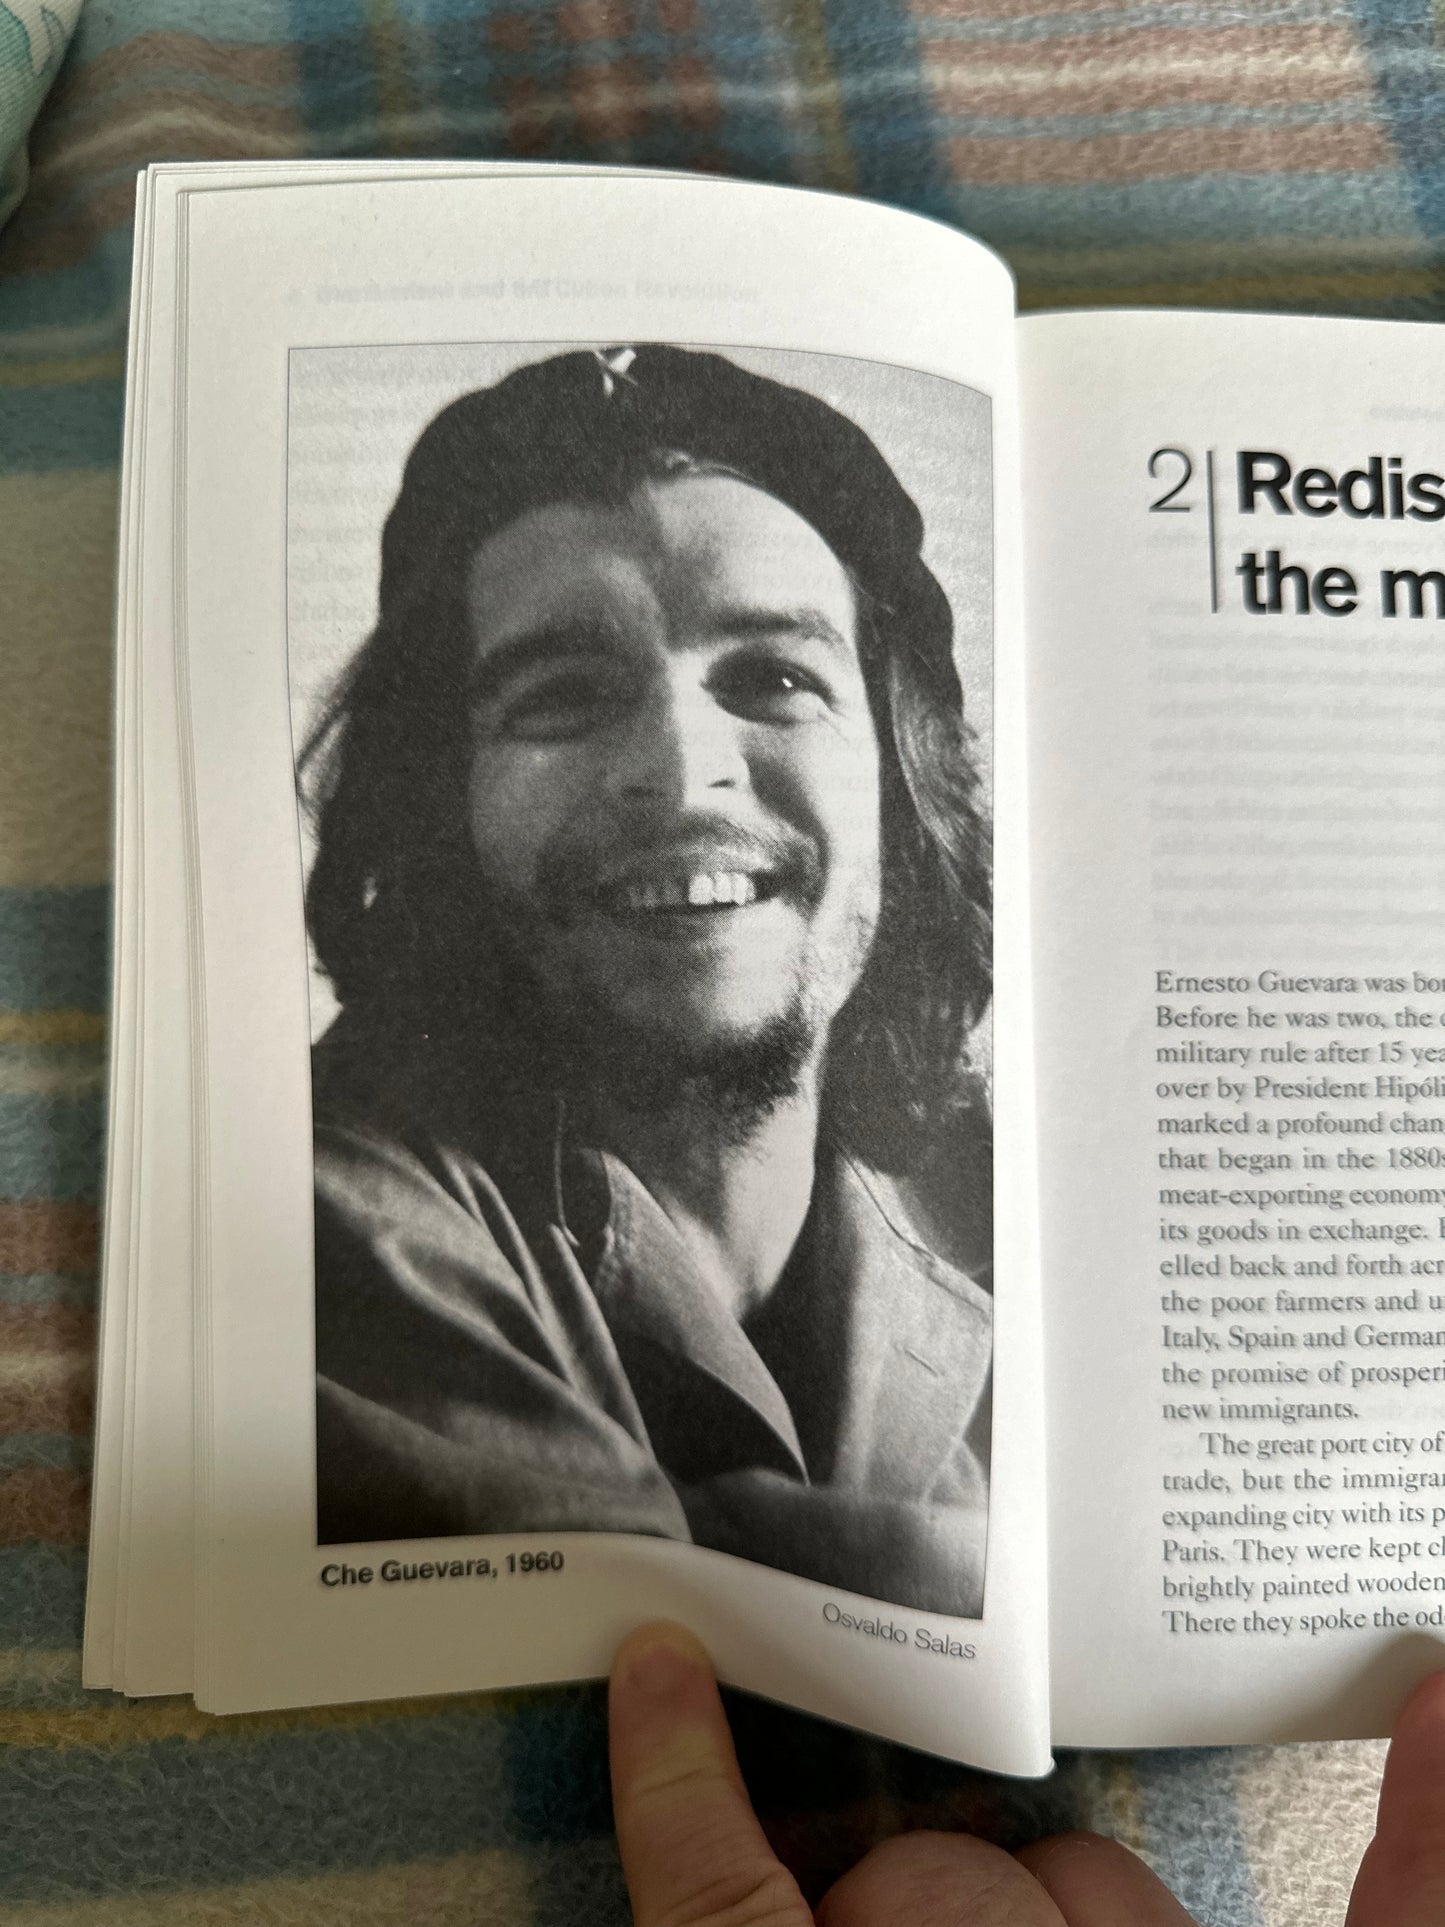 2004 Che Guevara & The Cuban Revolution- Mike Gonzalez(Bookmarks Publishers)